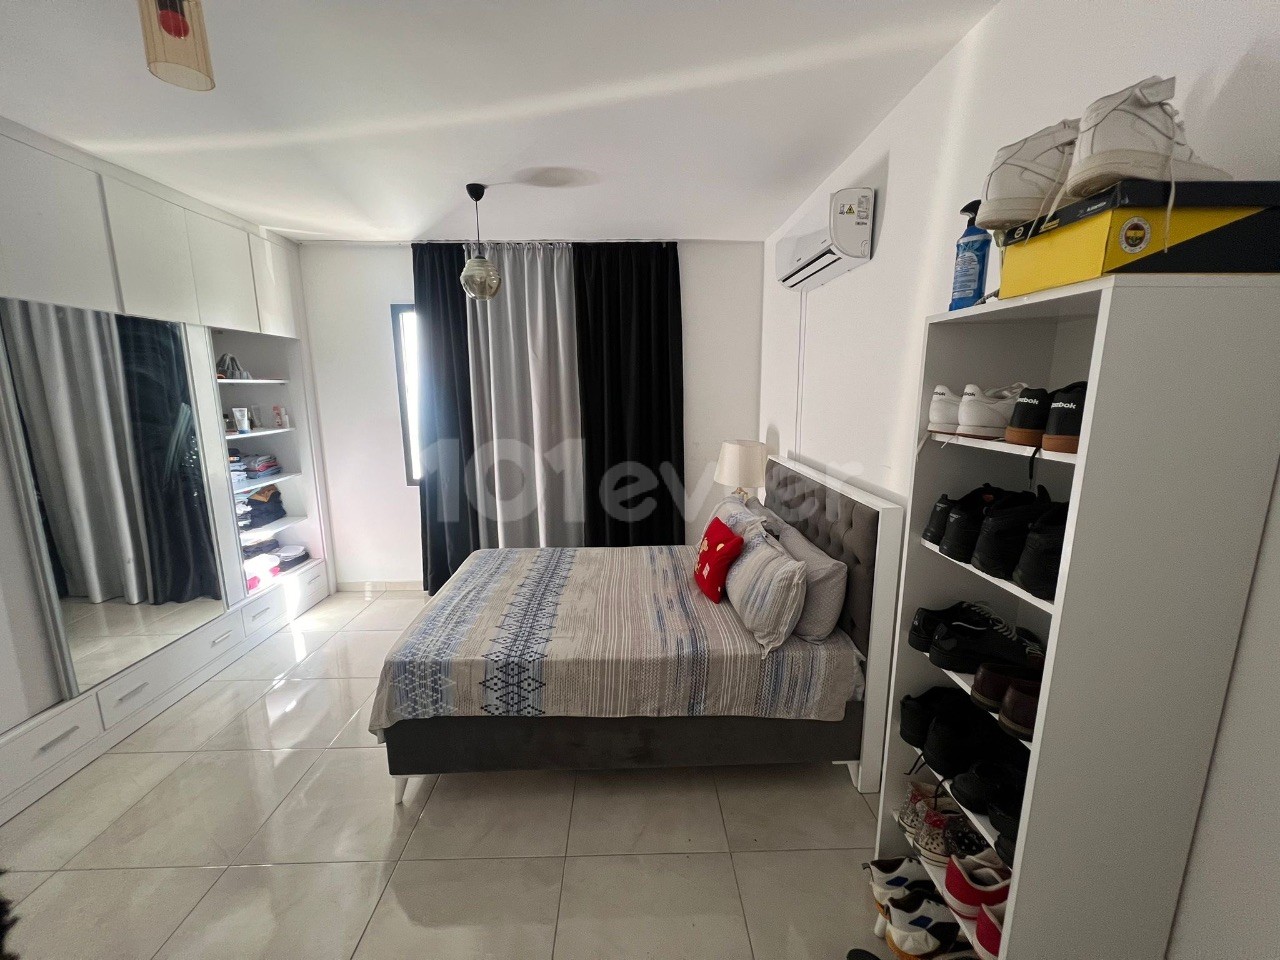 FULLY FURNISHED LUX 1+1 FLAT LOCATED ON THE MAIN ROAD AT GÖNYELİ ENTRANCE